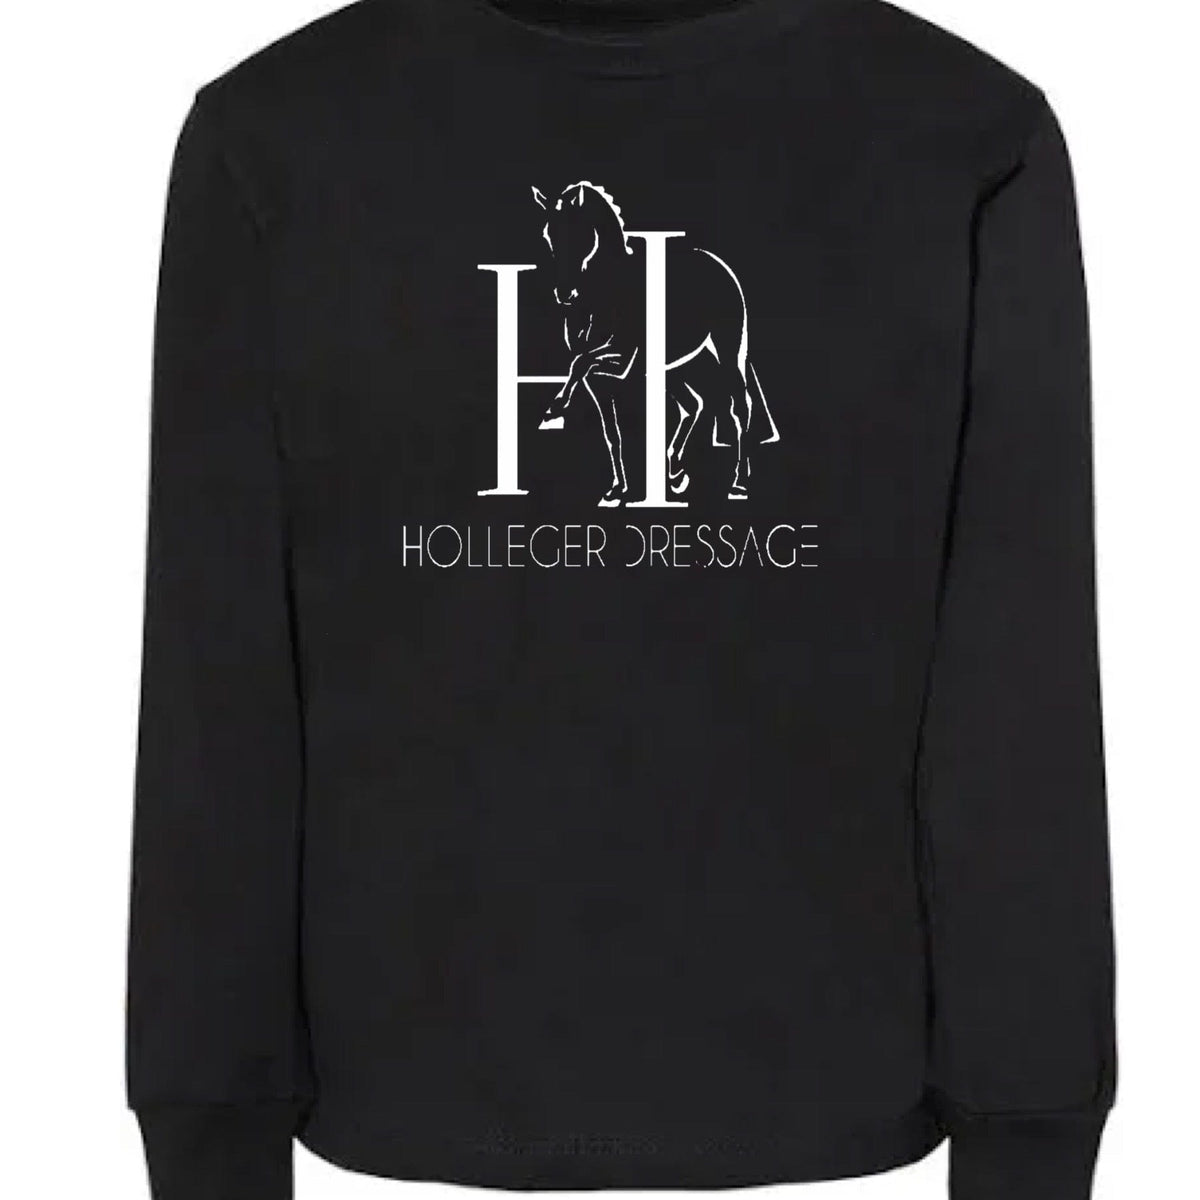 Equestrian Team Apparel Holleger Dressage Ladies Sun Shirts equestrian team apparel online tack store mobile tack store custom farm apparel custom show stable clothing equestrian lifestyle horse show clothing riding clothes horses equestrian tack store